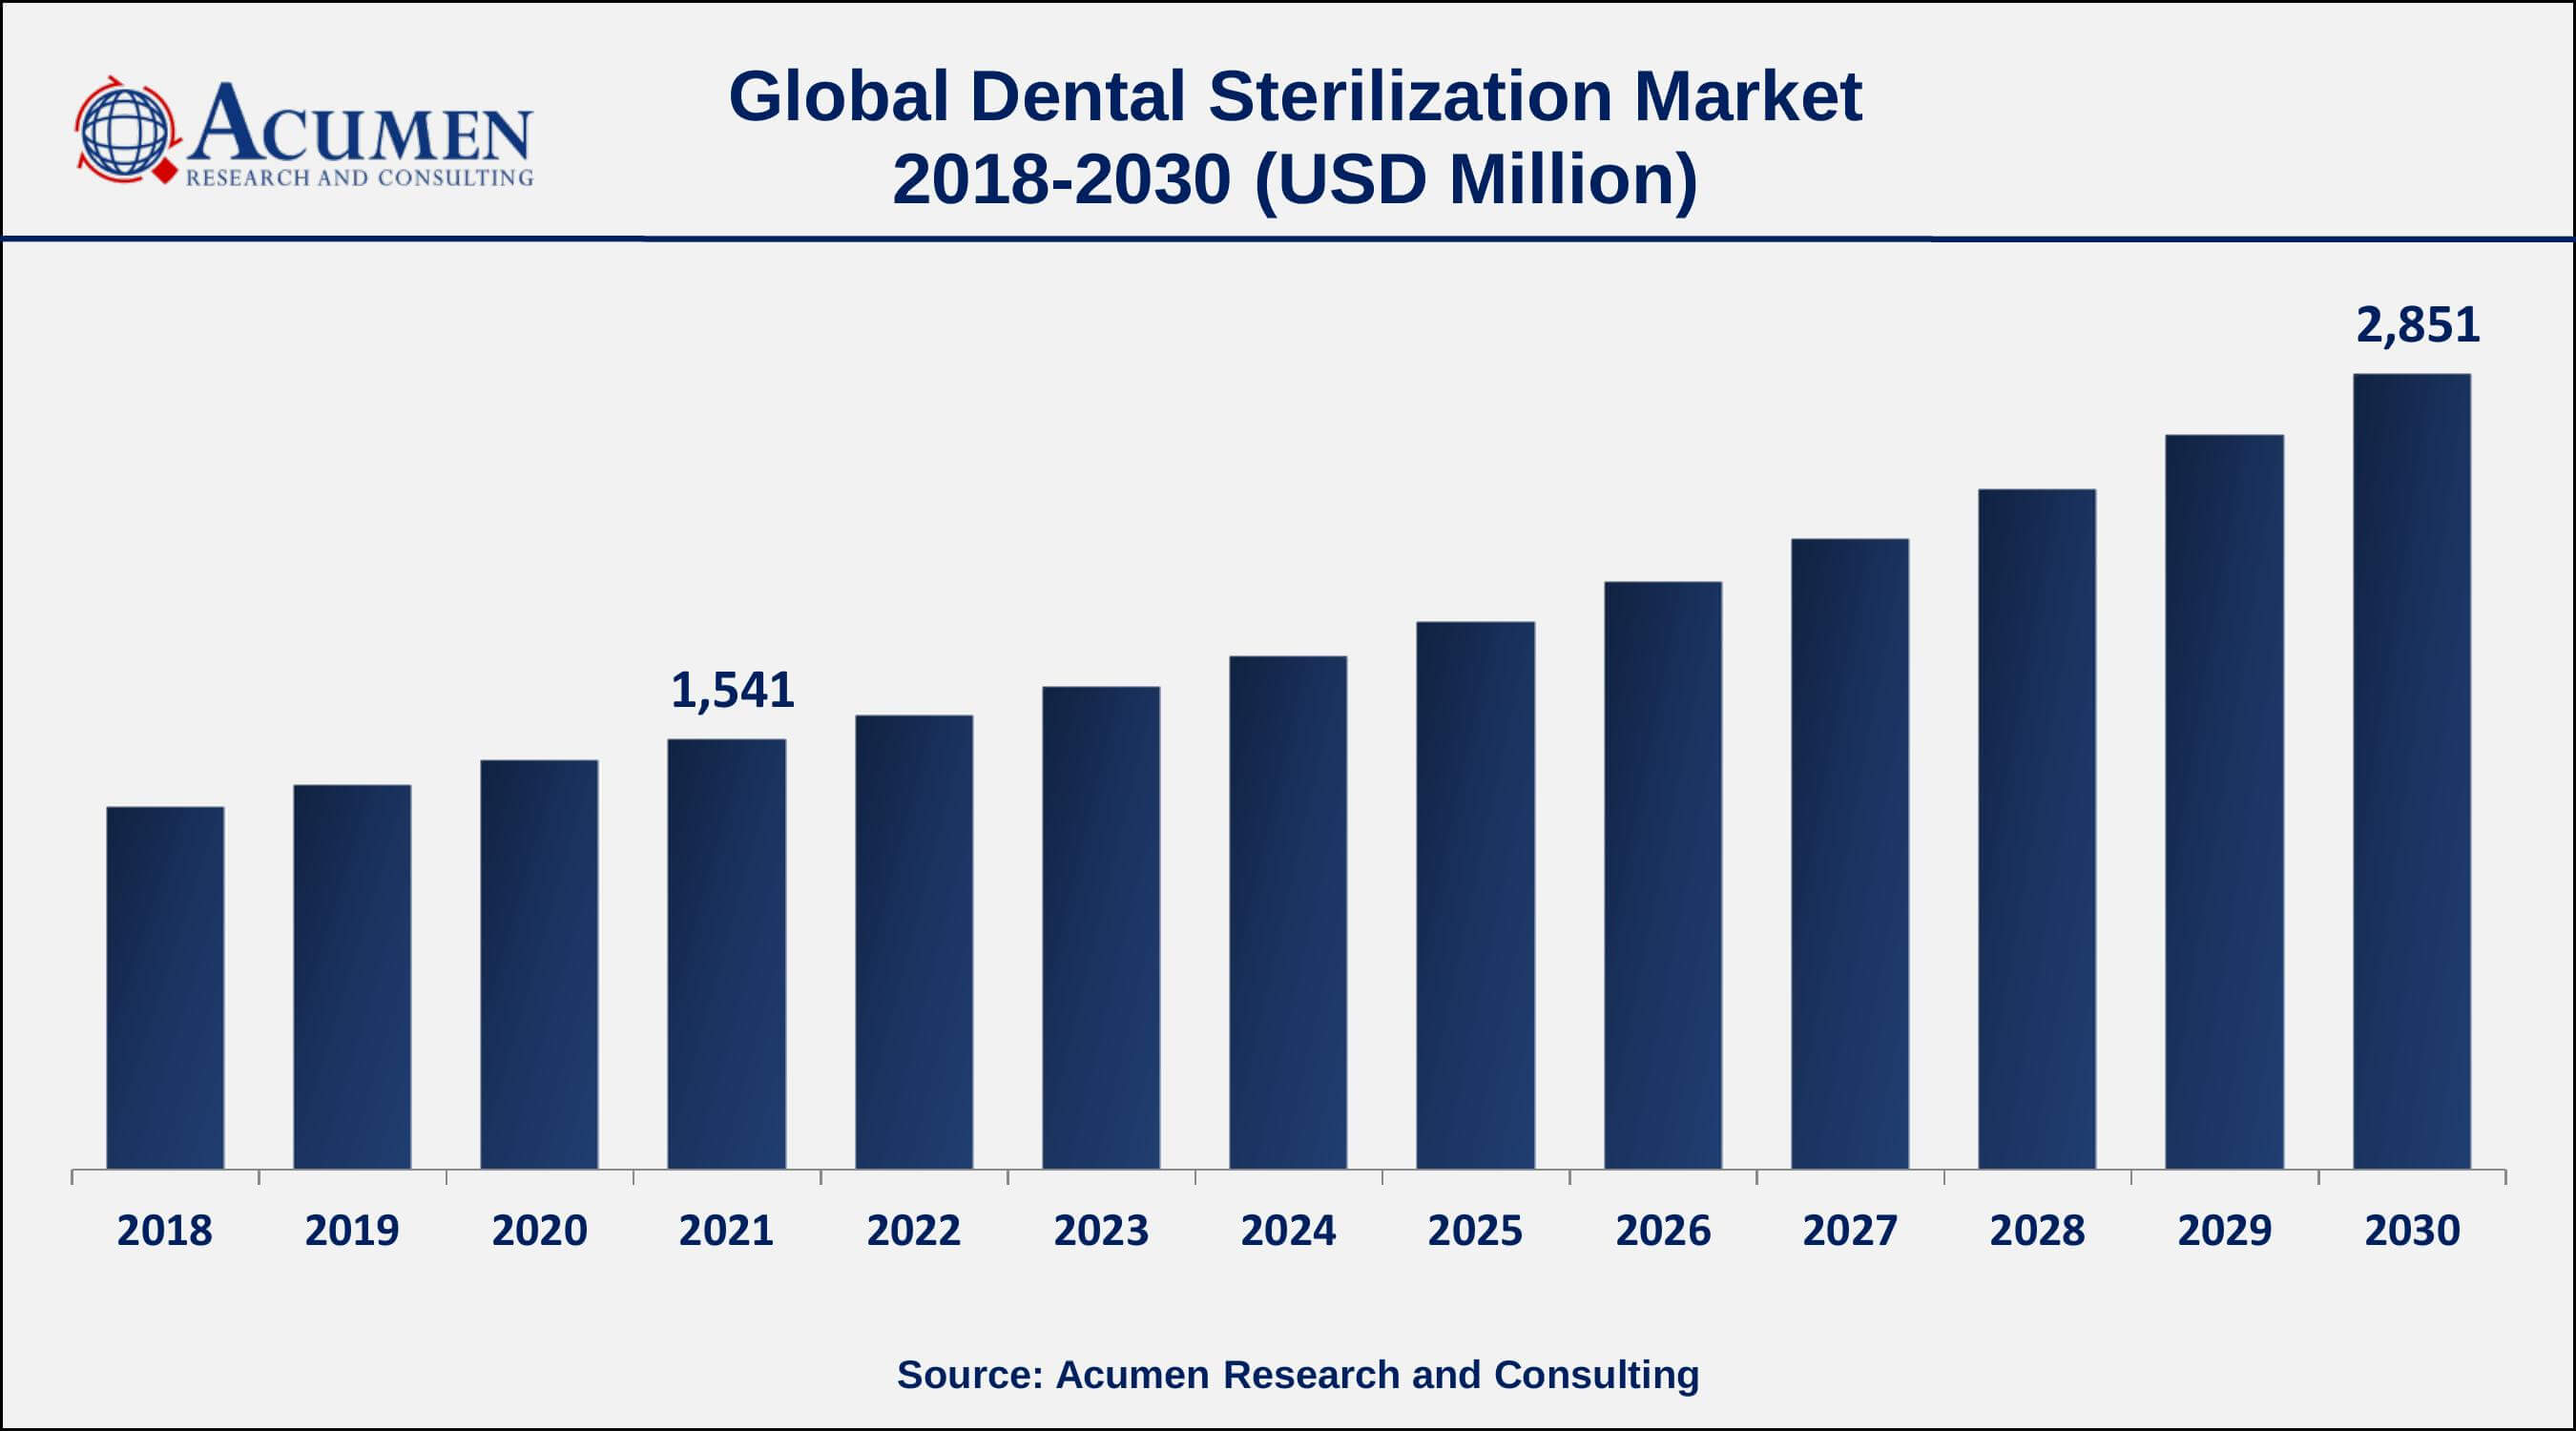 Asia-Pacific Dental Sterilization market growth will observe fastest CAGR from 2022 to 2030